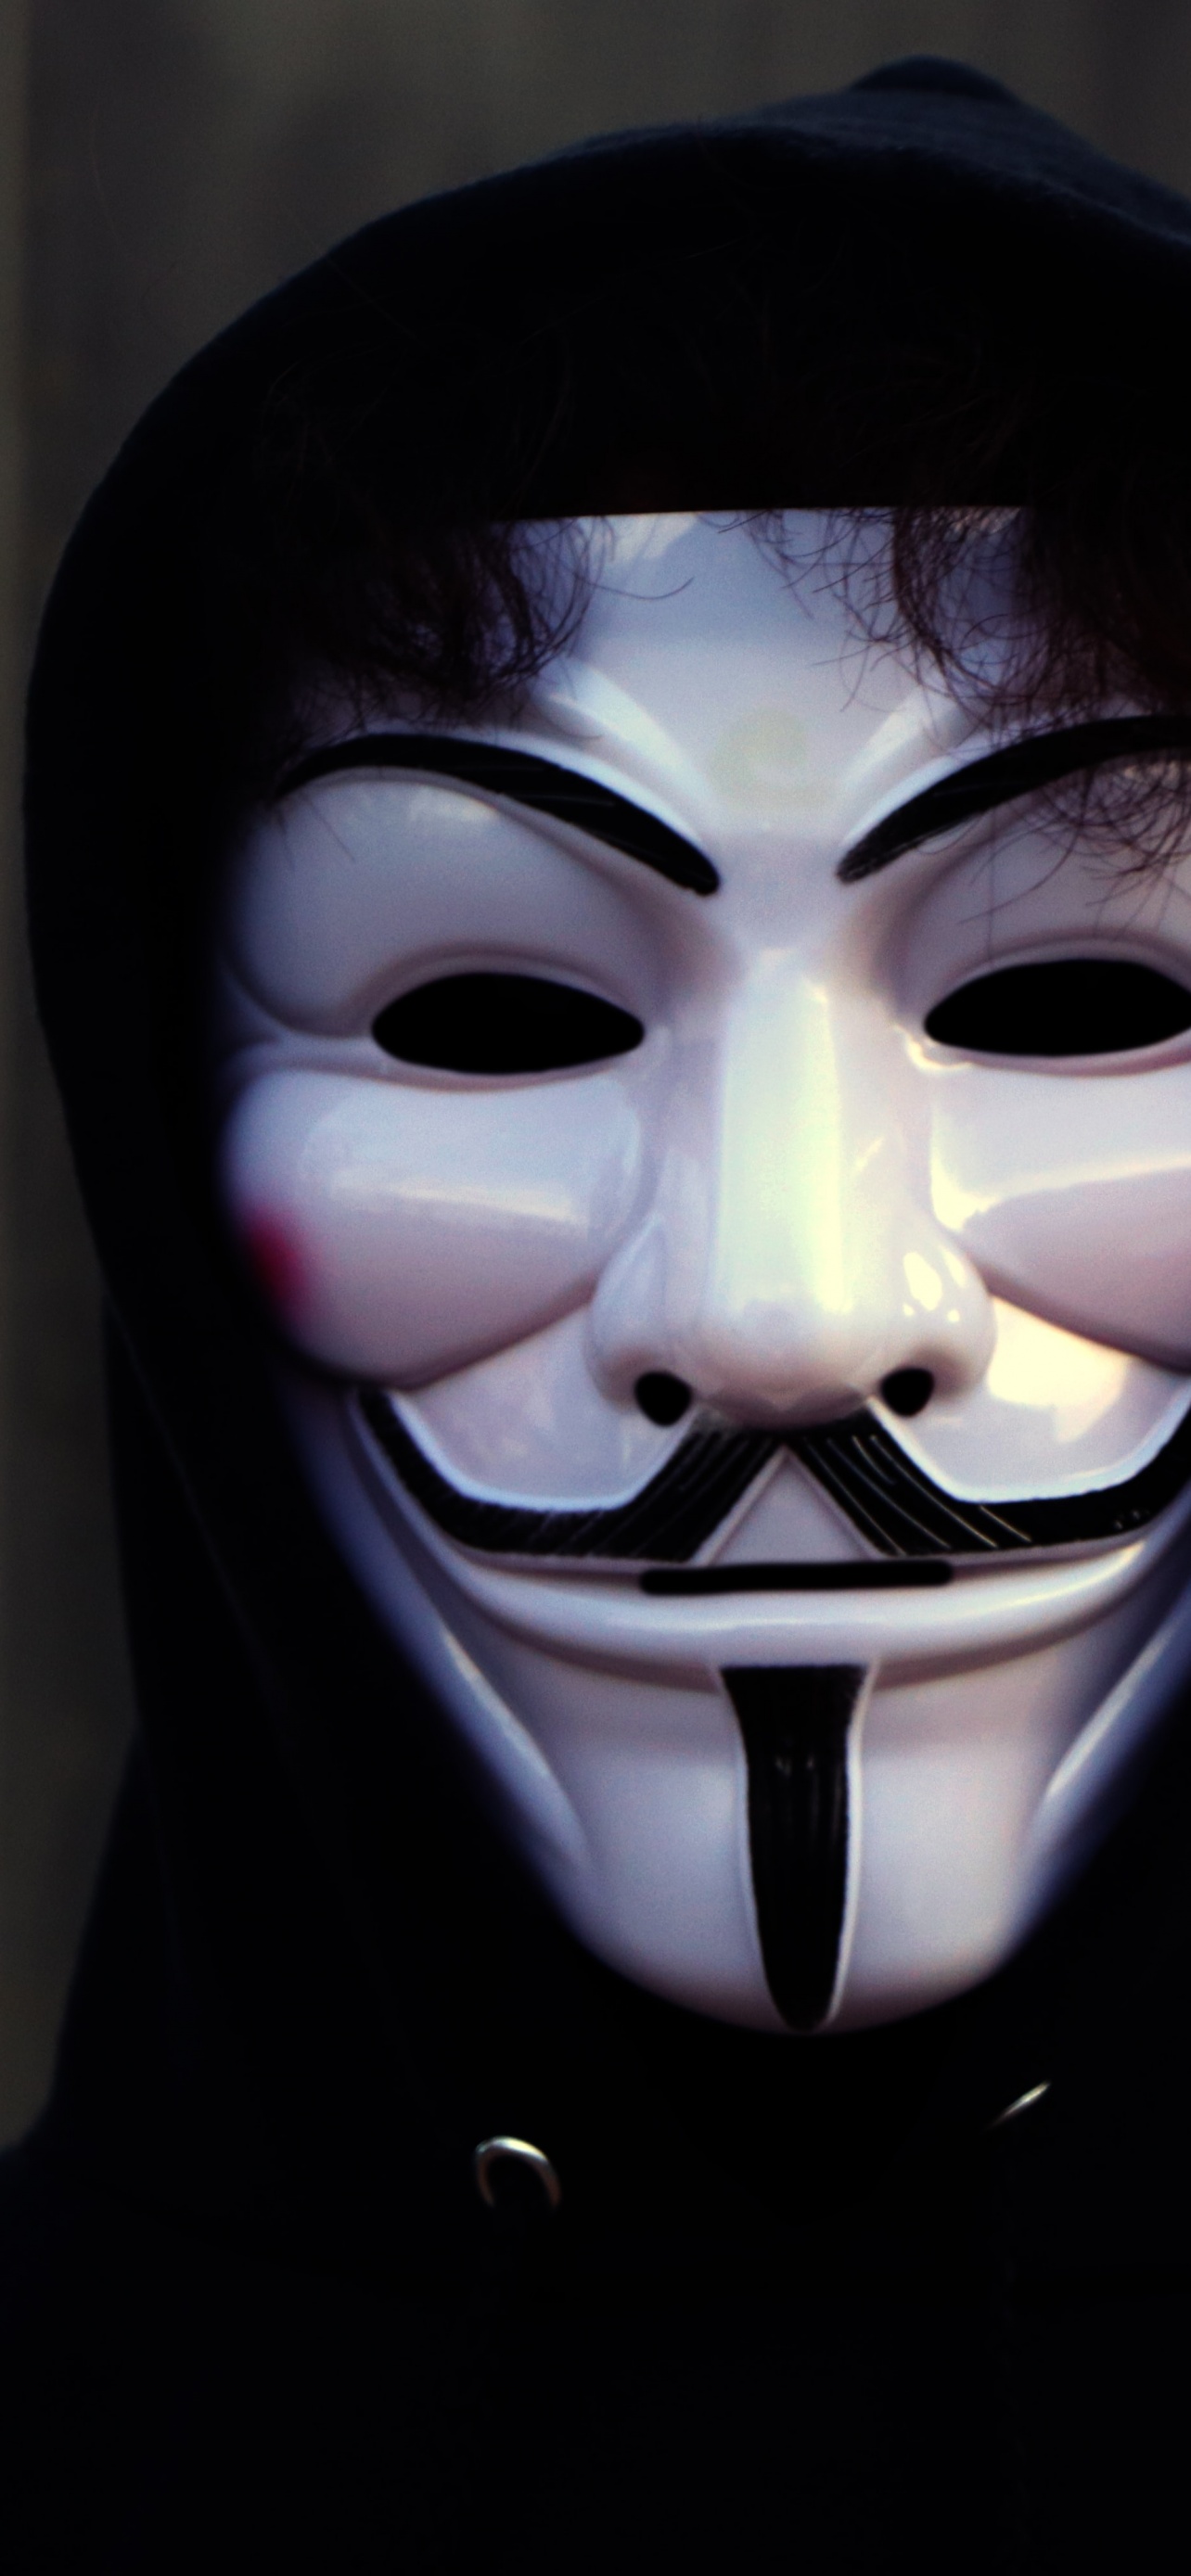 Man in Mask Wallpaper 4K, Anonymous, White masks, Photography, #2156